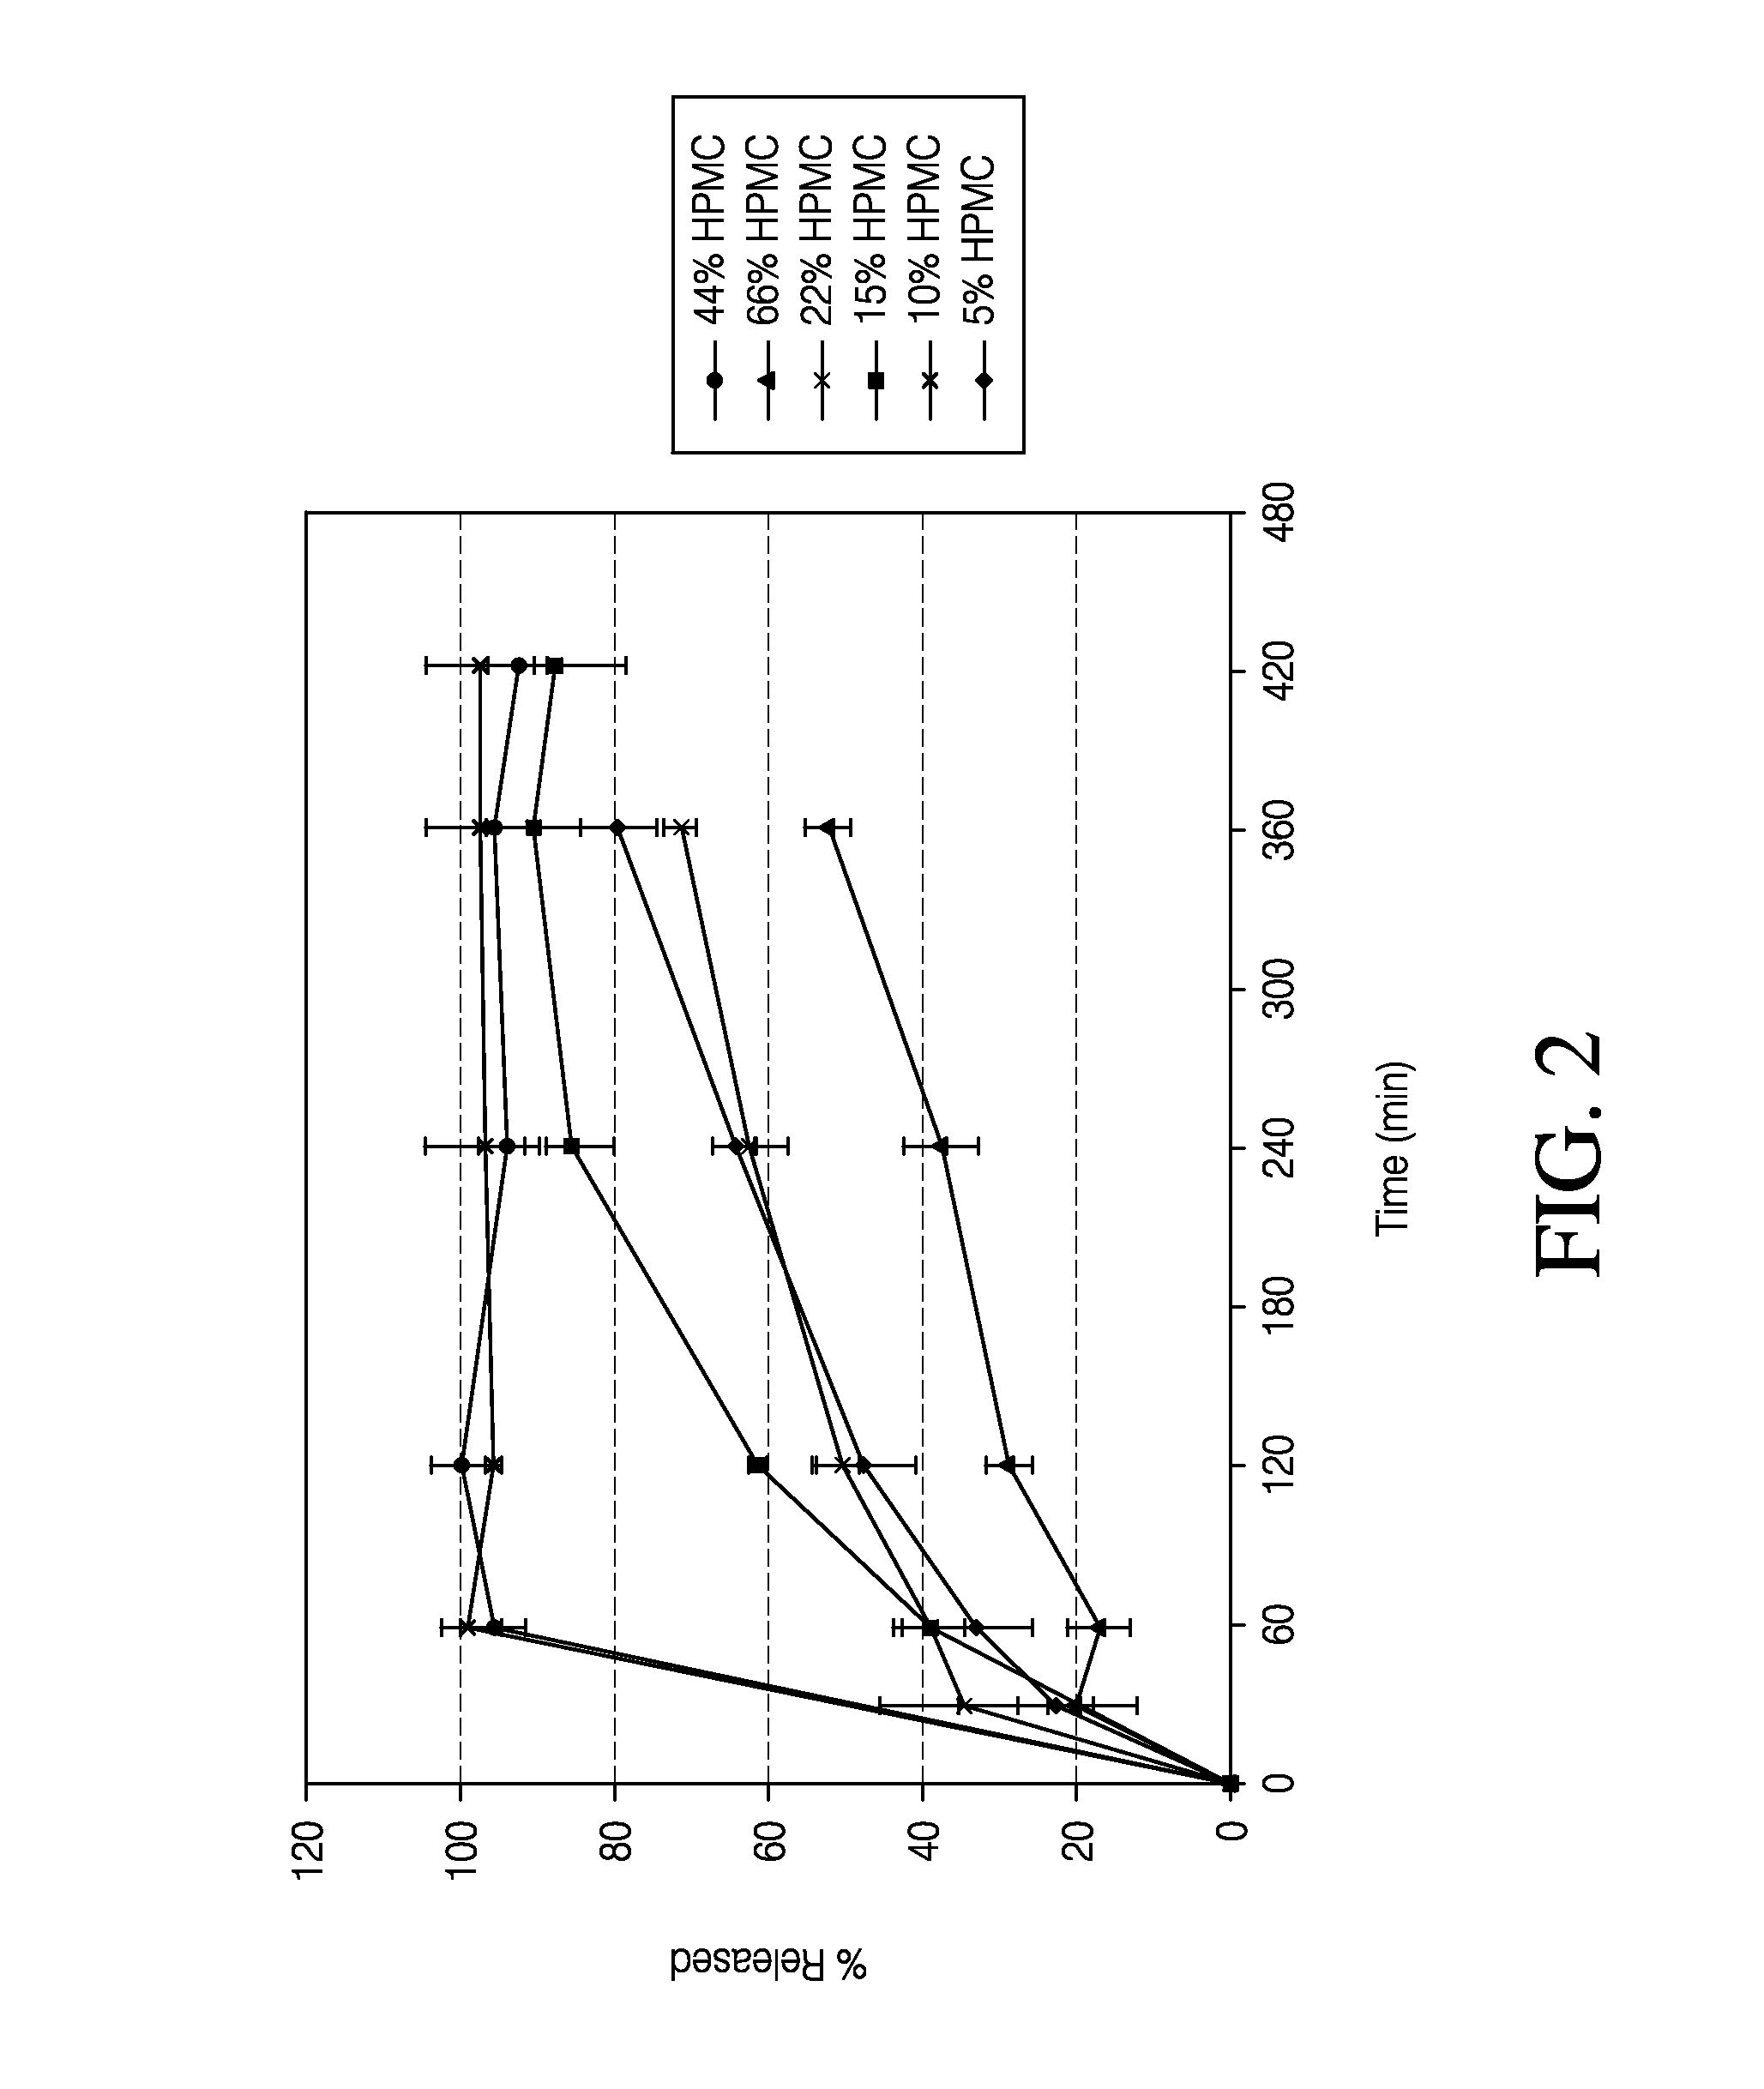 Sustained release formulation of naltrexone